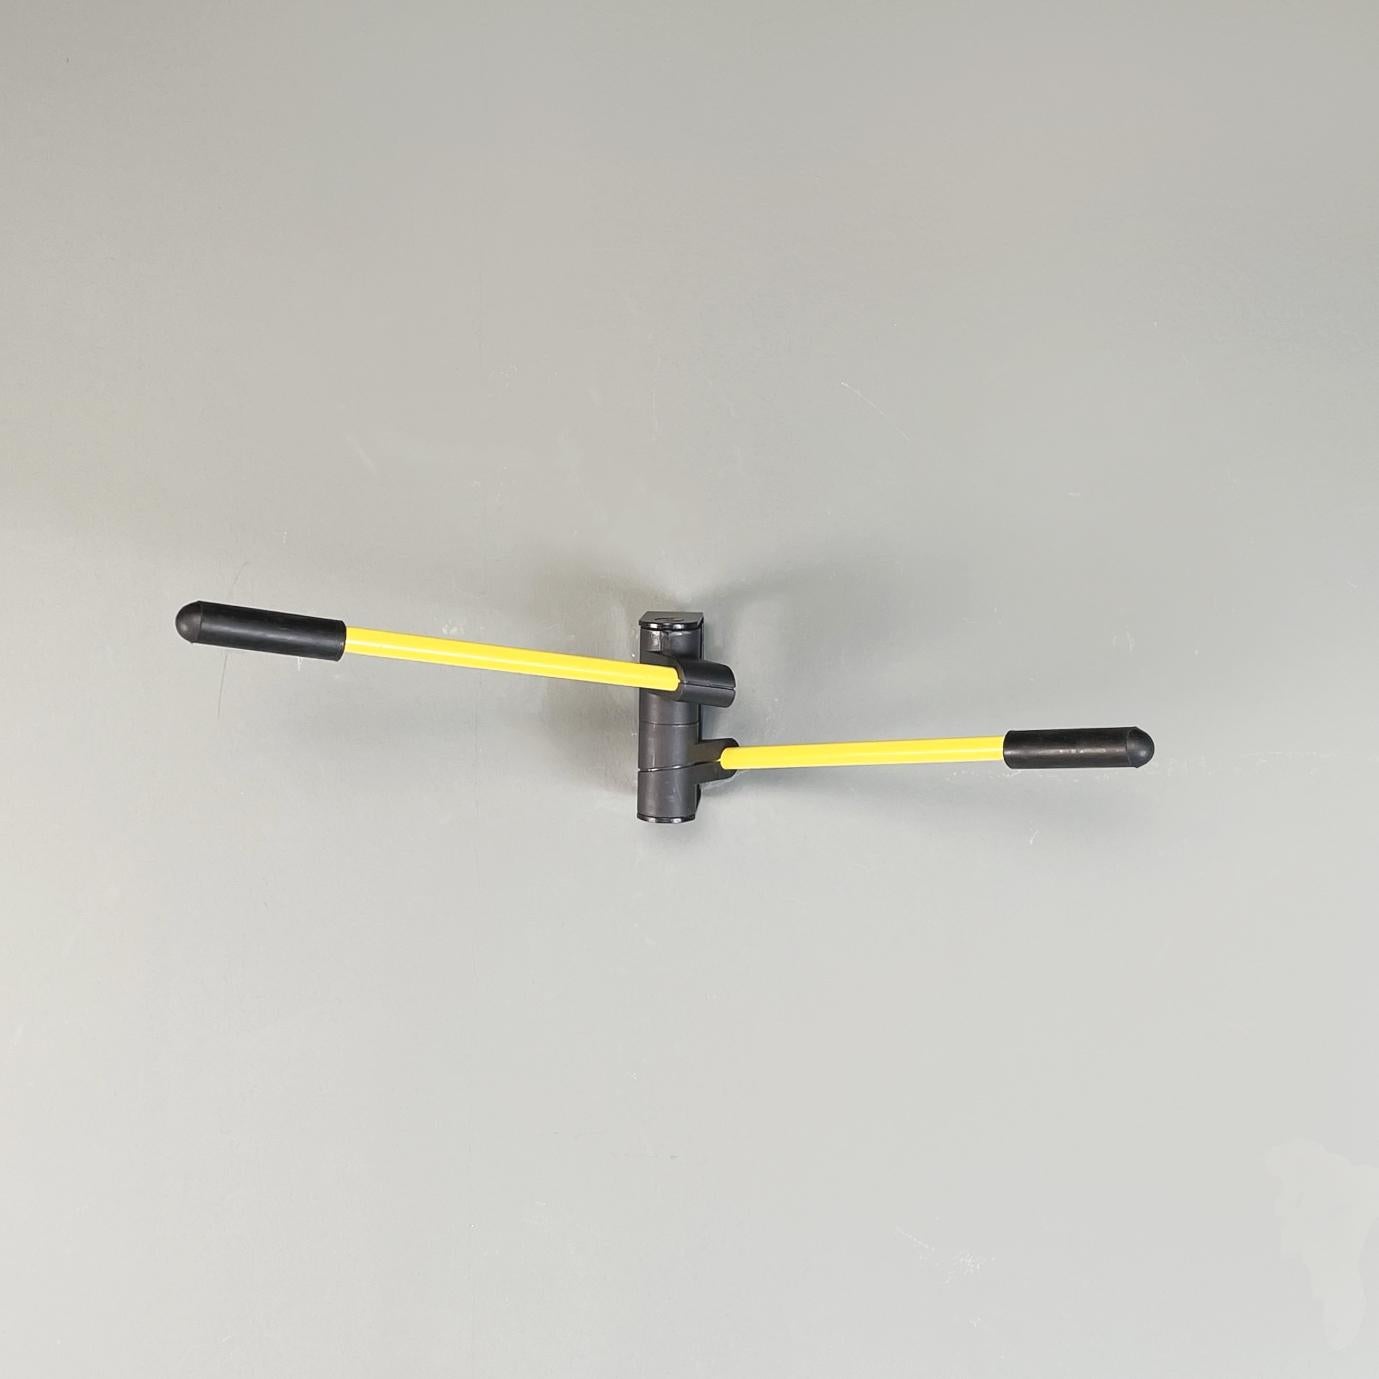 Italian modern Wall hanger Signa by De Pas, D'urbino and Lomazzi for Artemide, 1970s
Wall coat hanger mod. Signa made up of two movable arms in yellow painted tubular metal with black rubber tips. The base fixed to the wall is rectangular in black